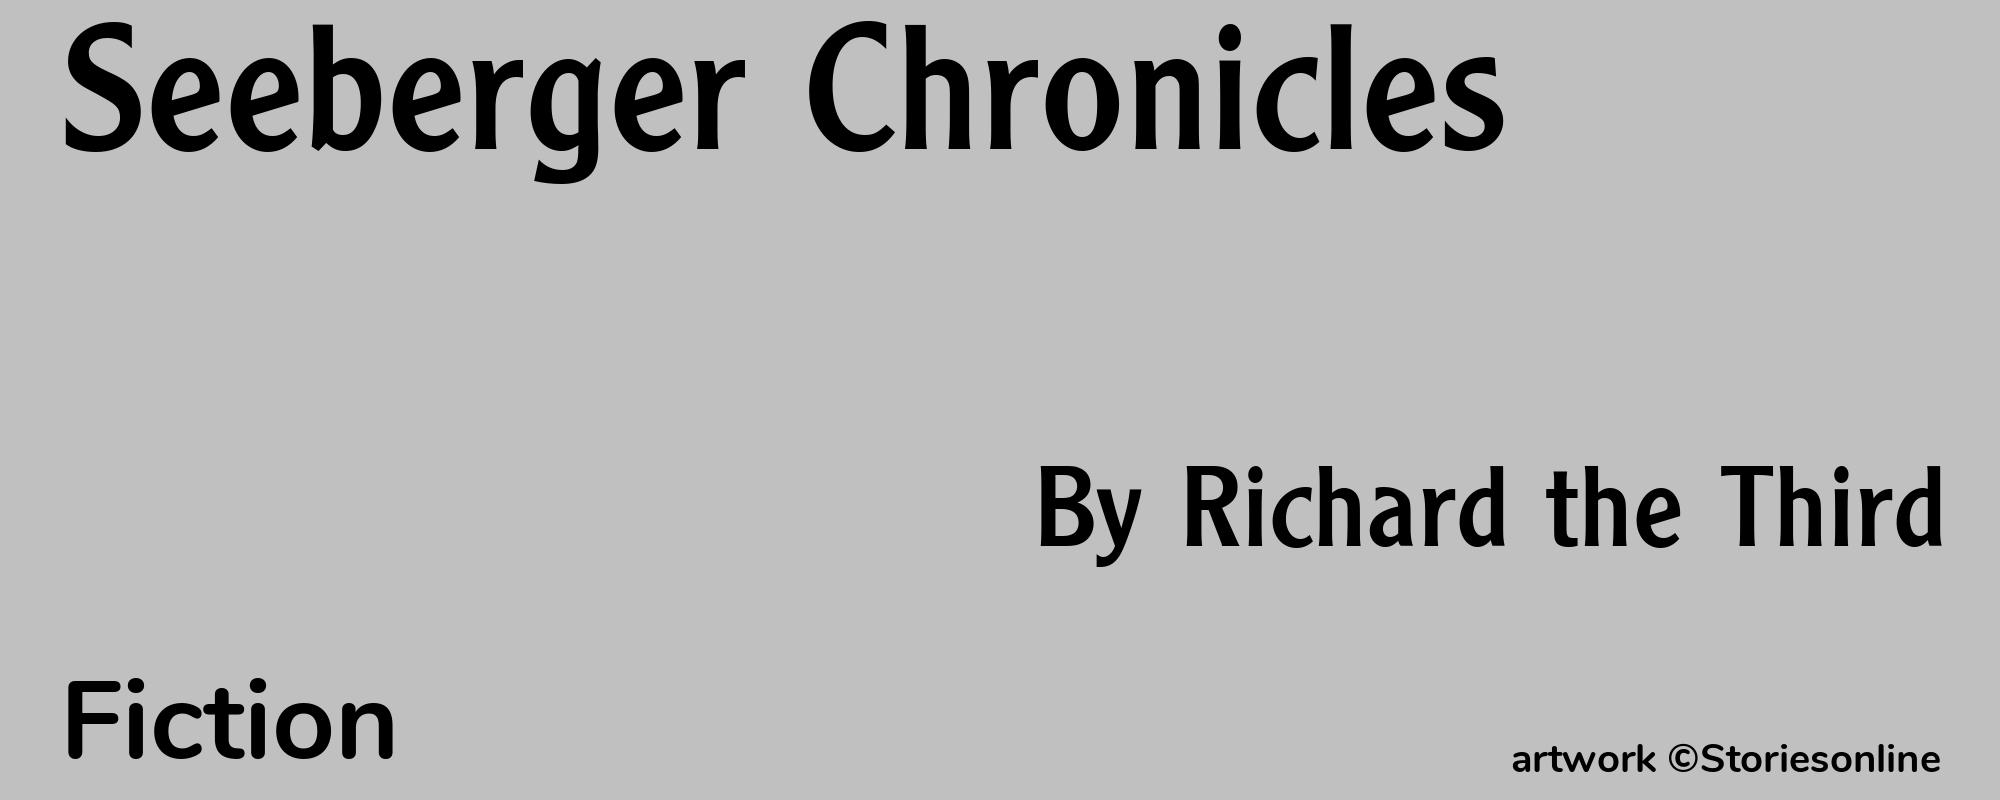 Seeberger Chronicles - Cover